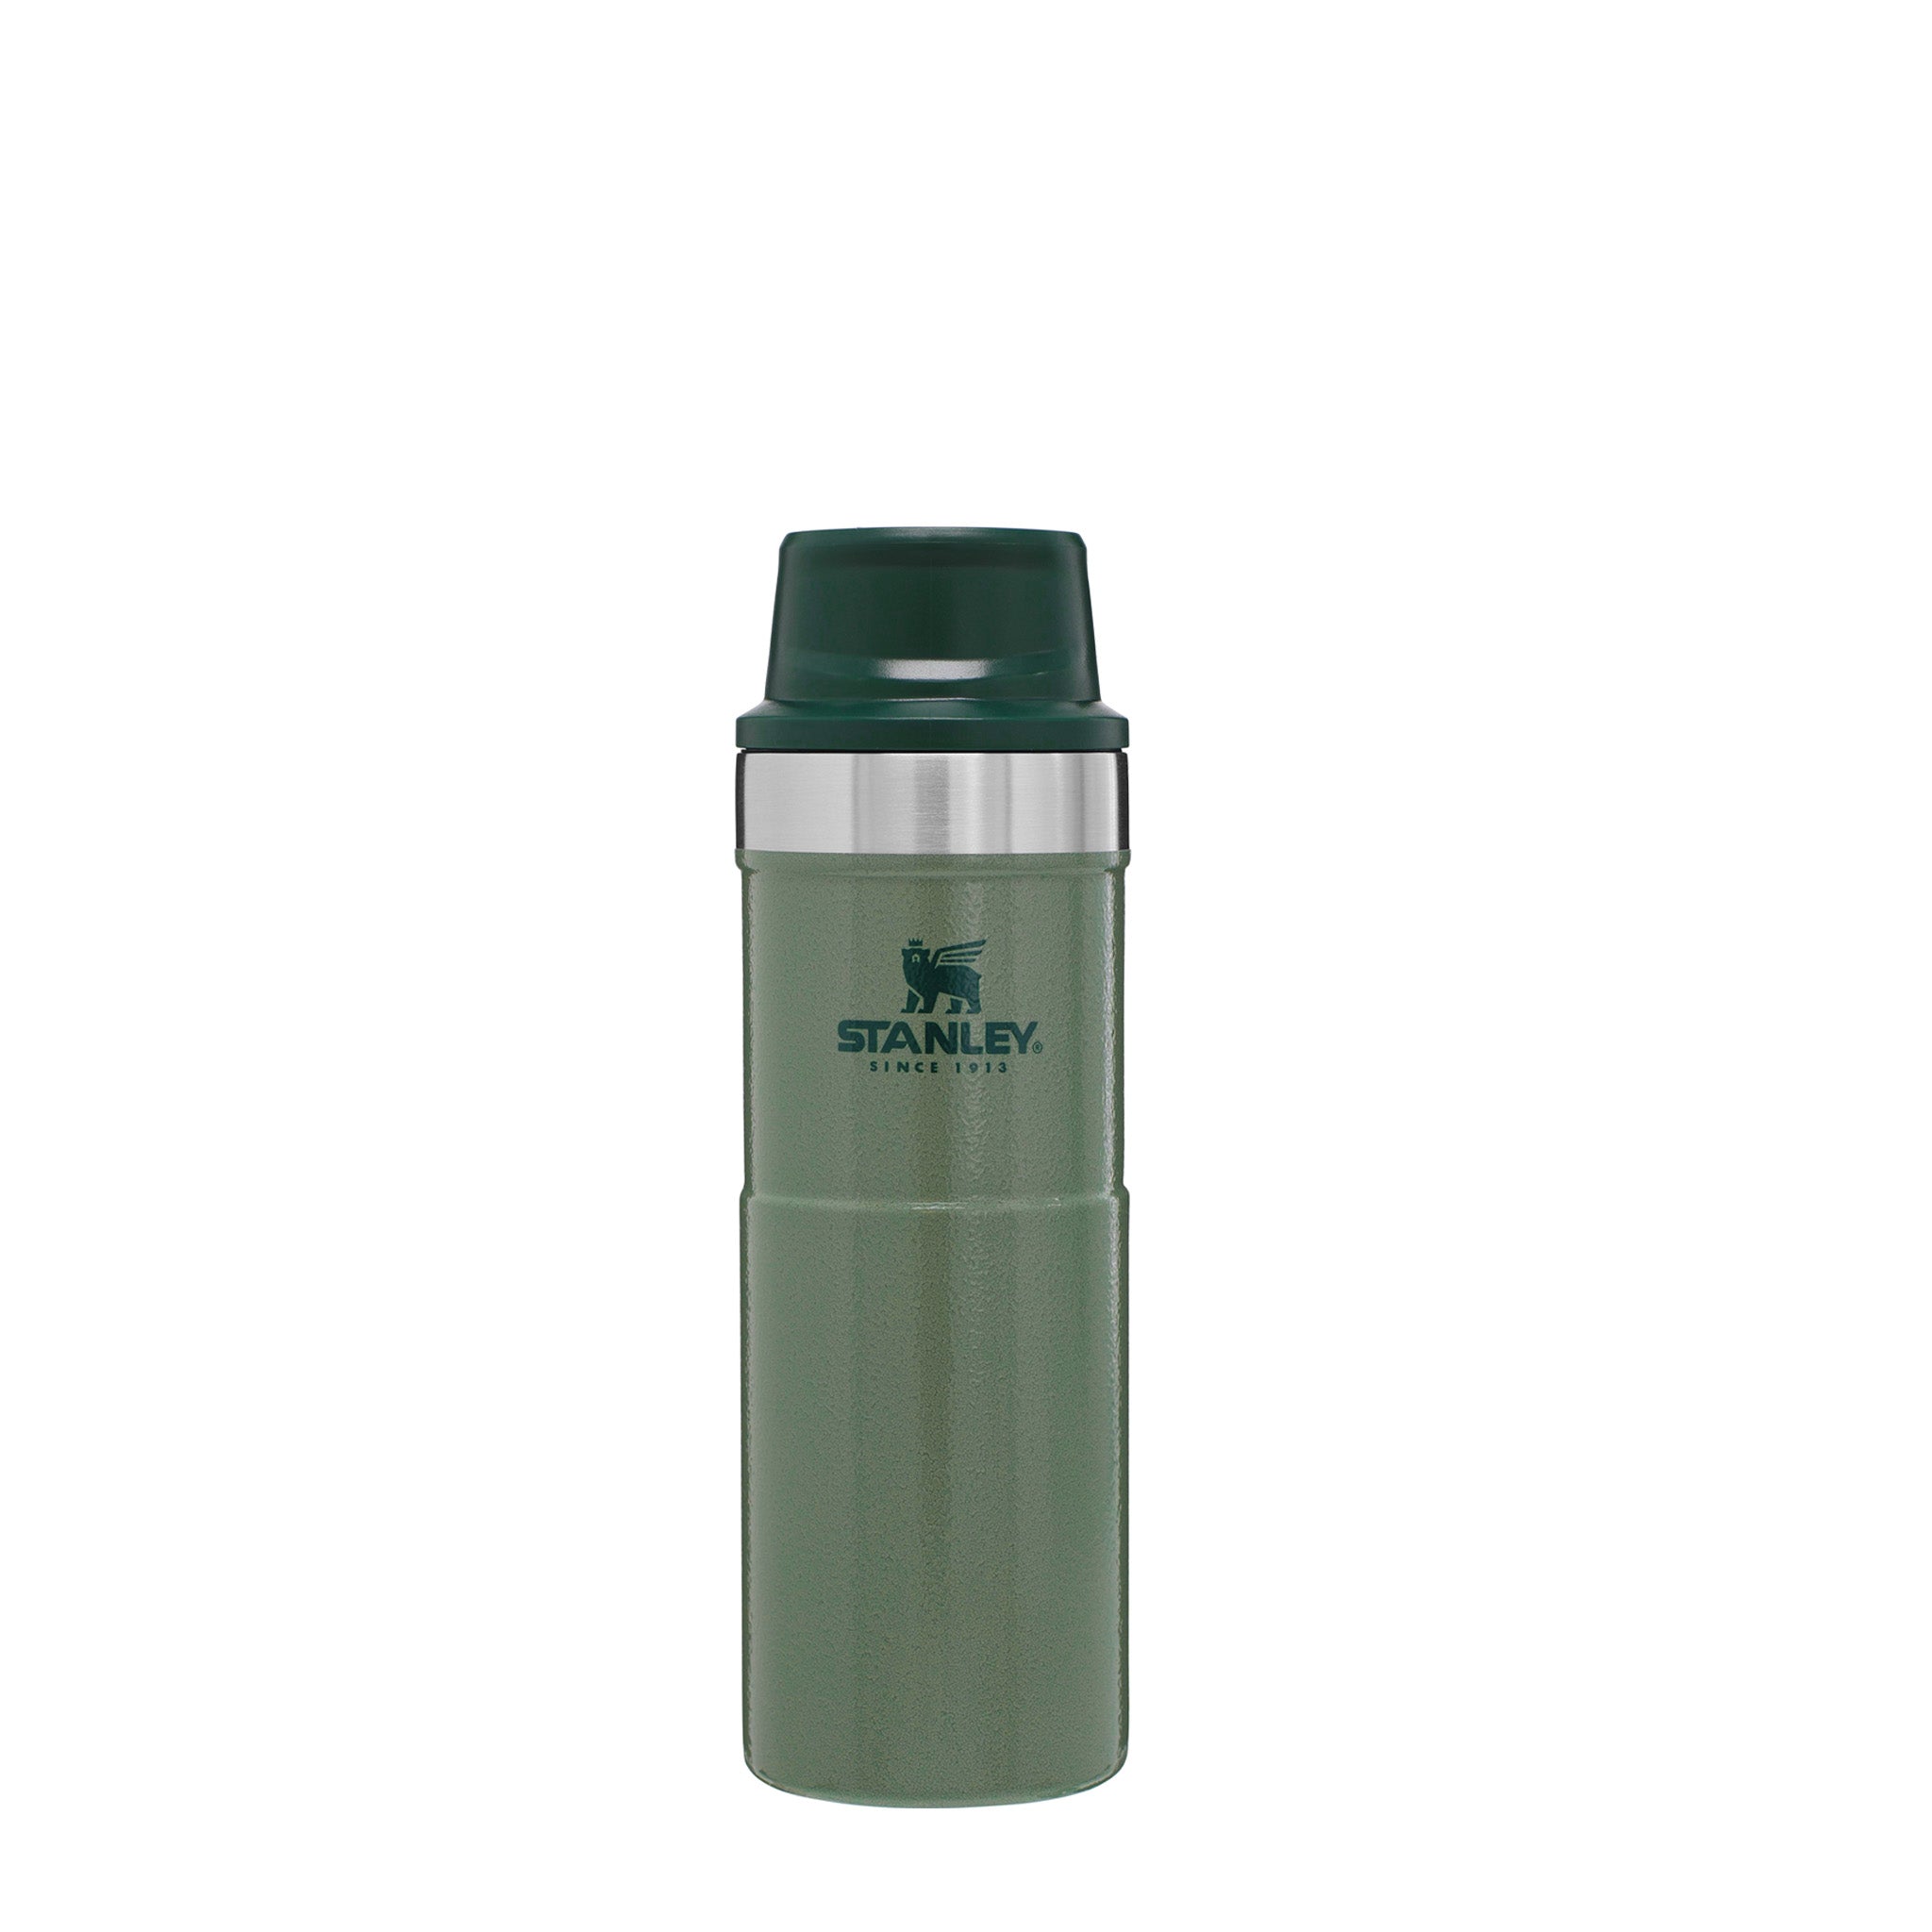 Stanley Stainless Steel Thermos 2.5 qt Hammertone Green